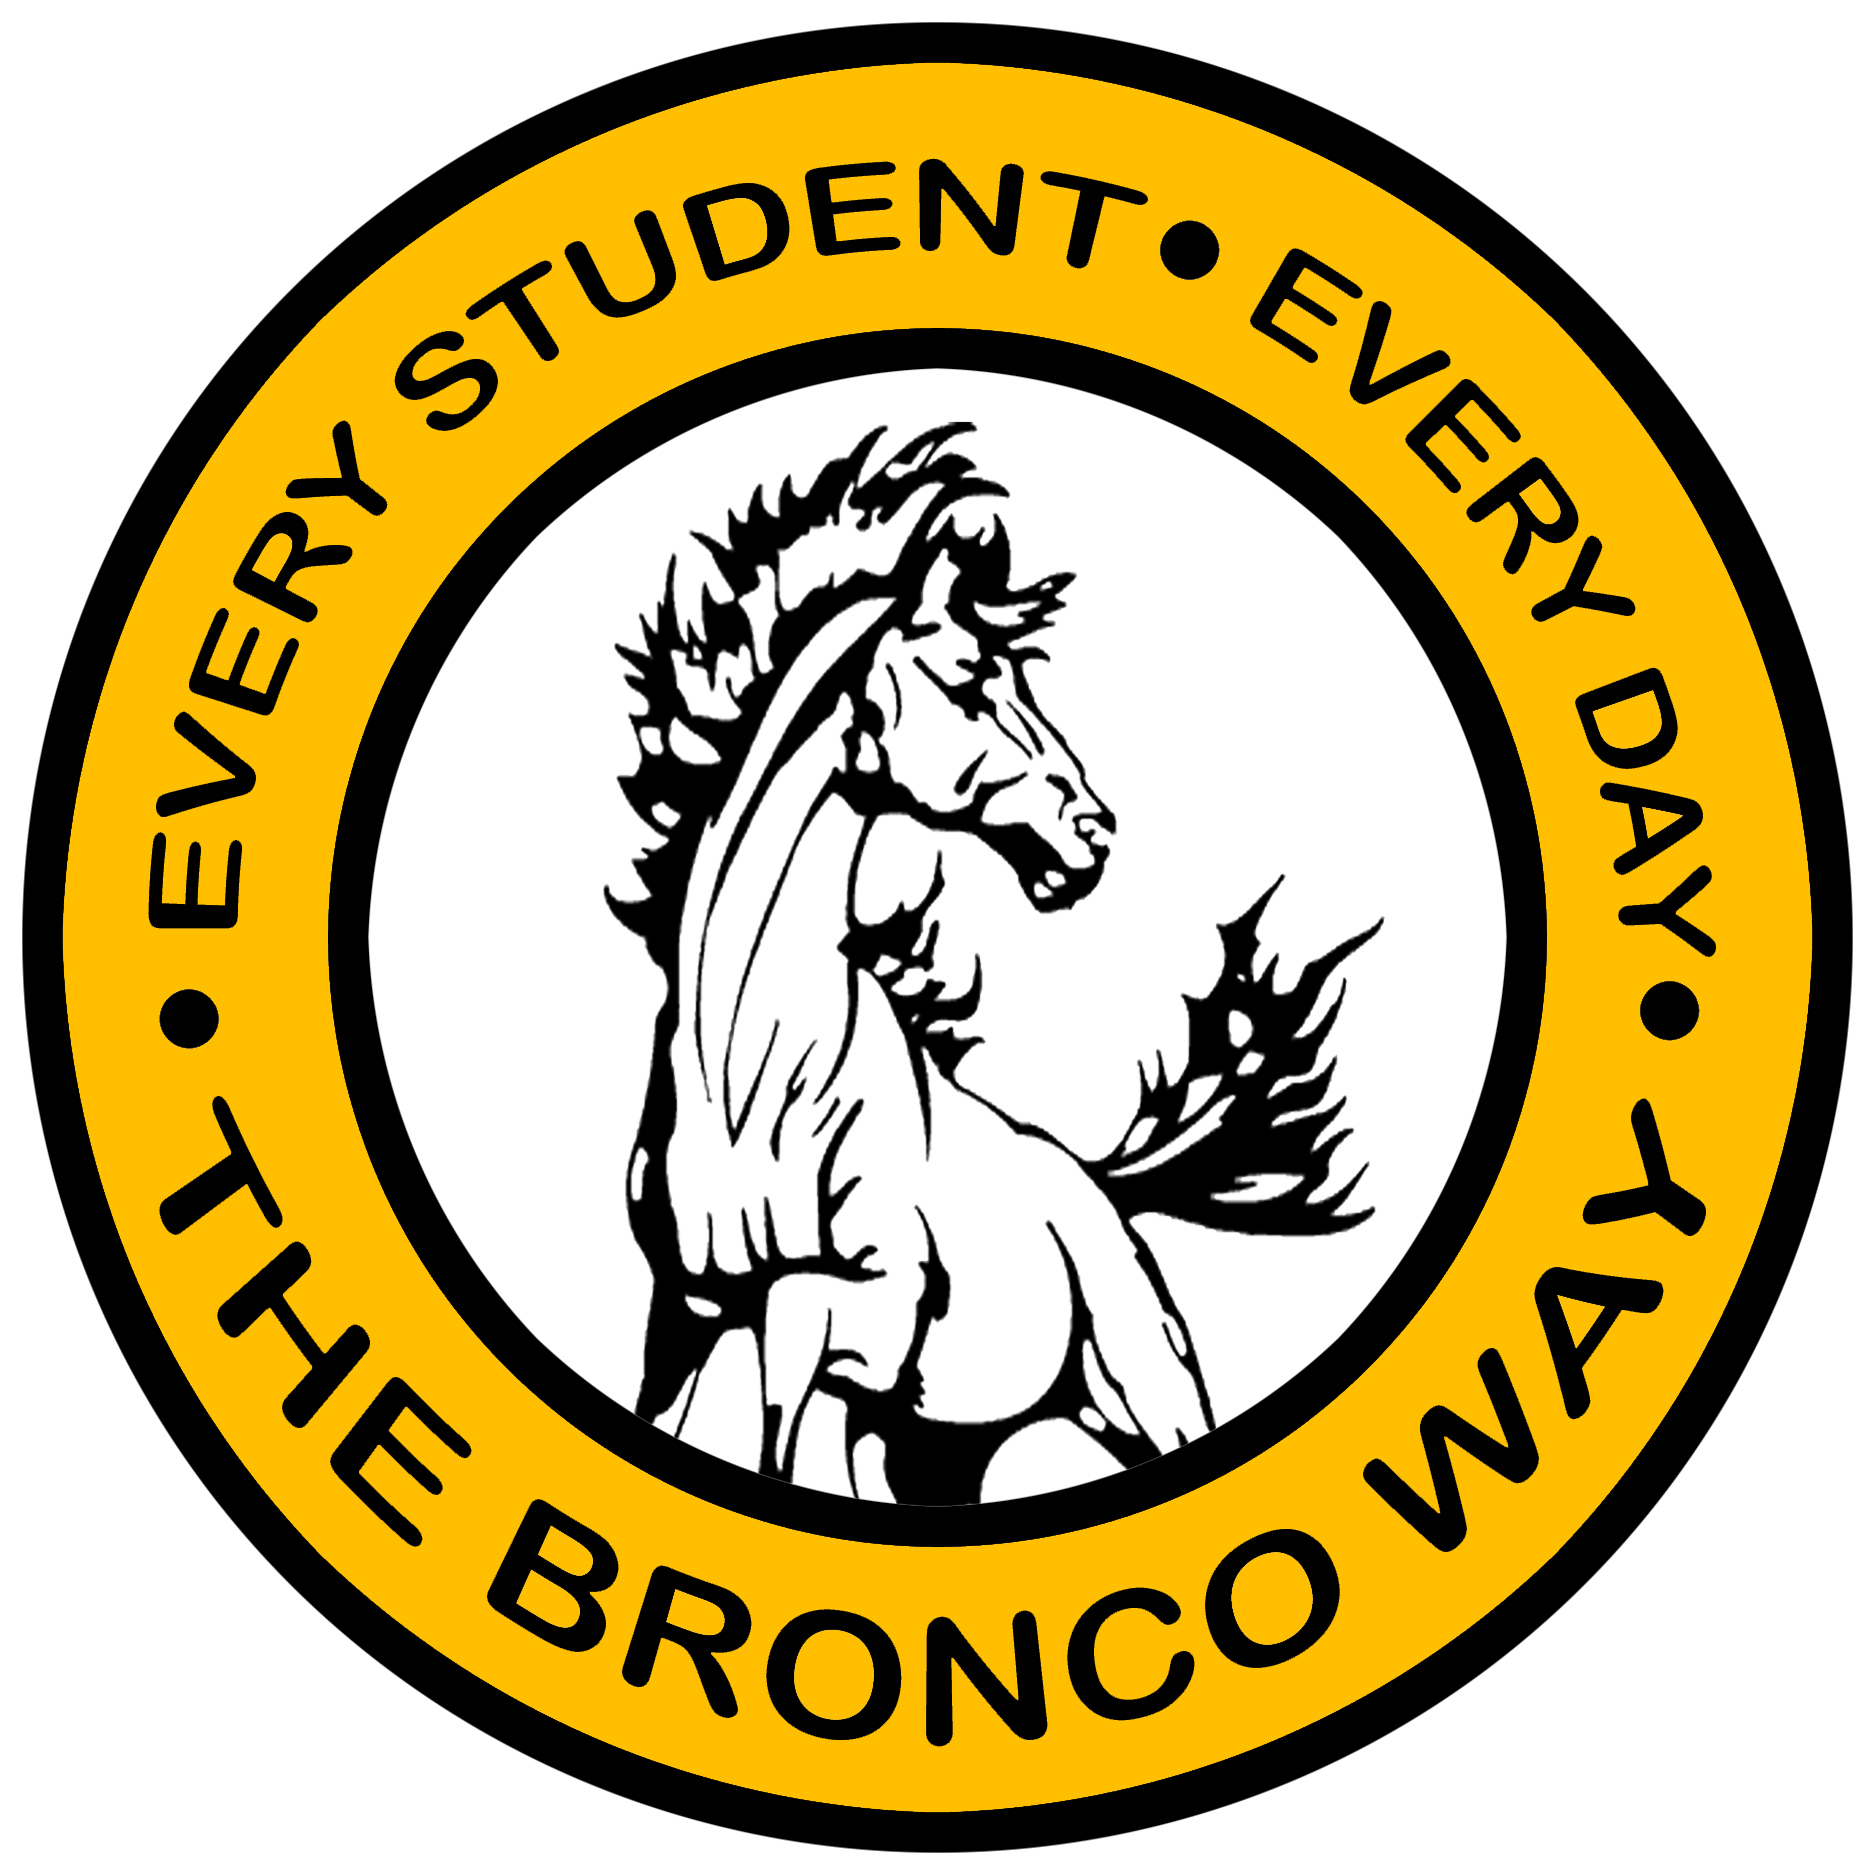 Logo of "Every Student. Every Day. The Bronco Way."